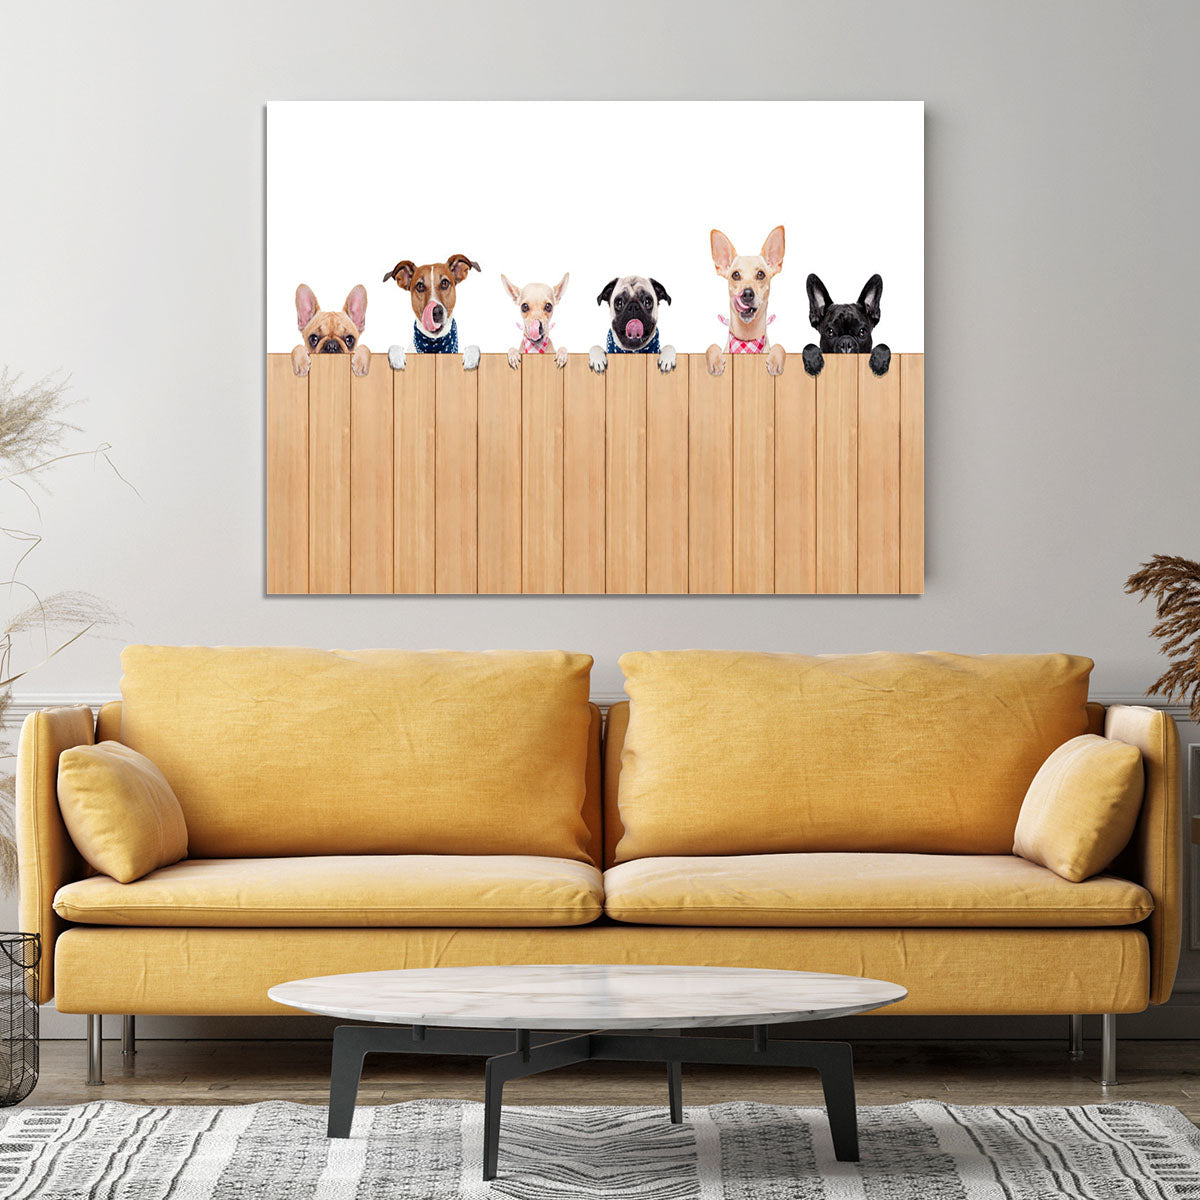 Row of dogs as a group or team all hungry Canvas Print or Poster - Canvas Art Rocks - 4